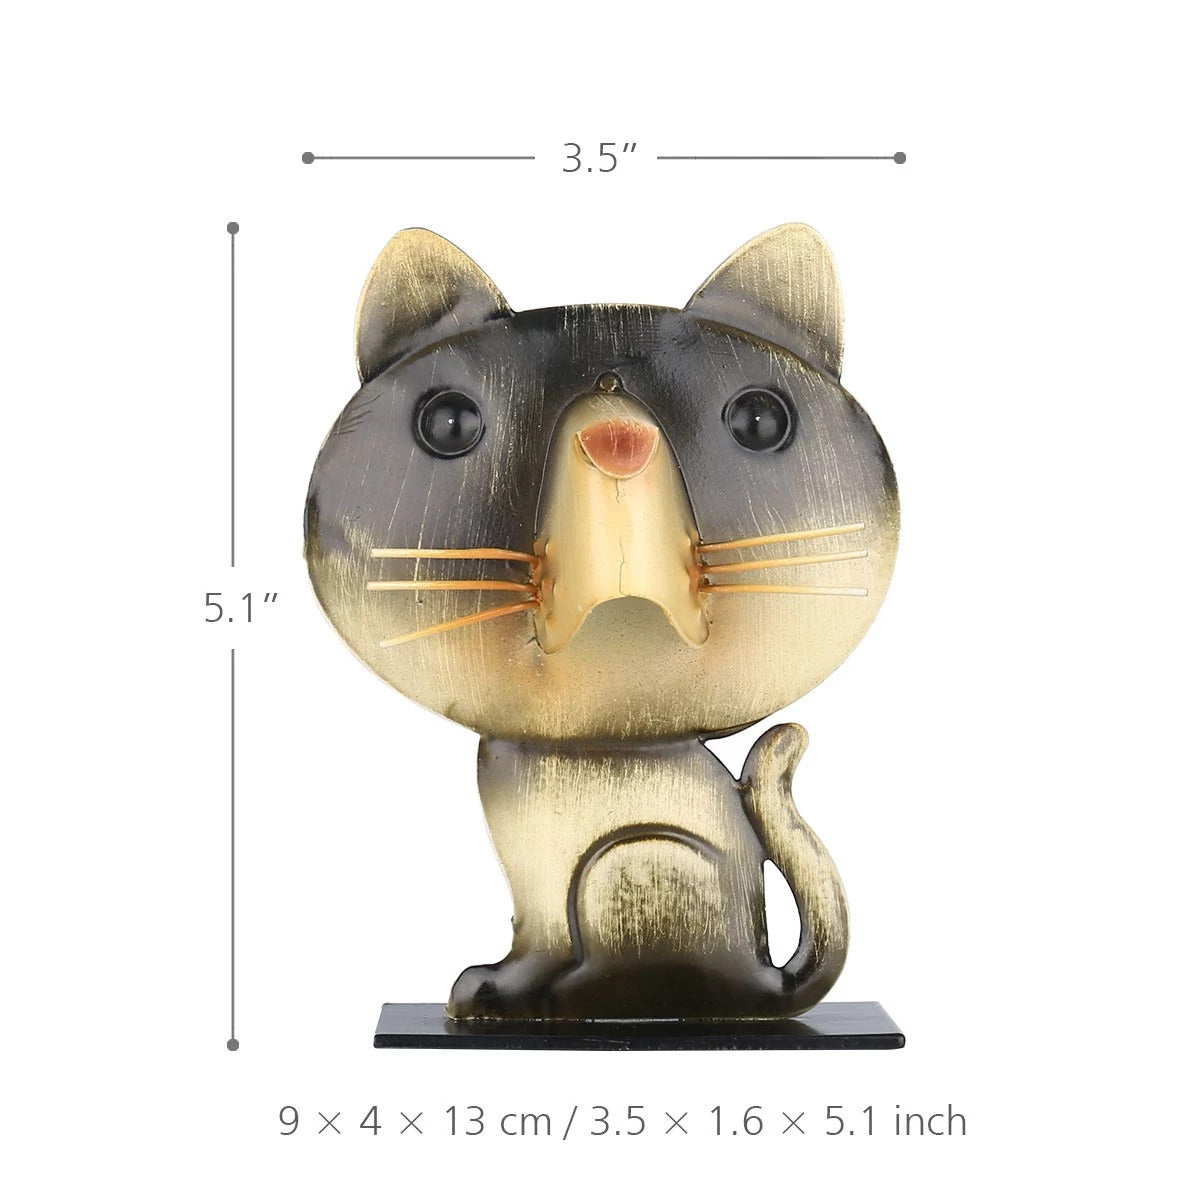 Gifts For Cat Lovers as Ornaments with Cat Figurines